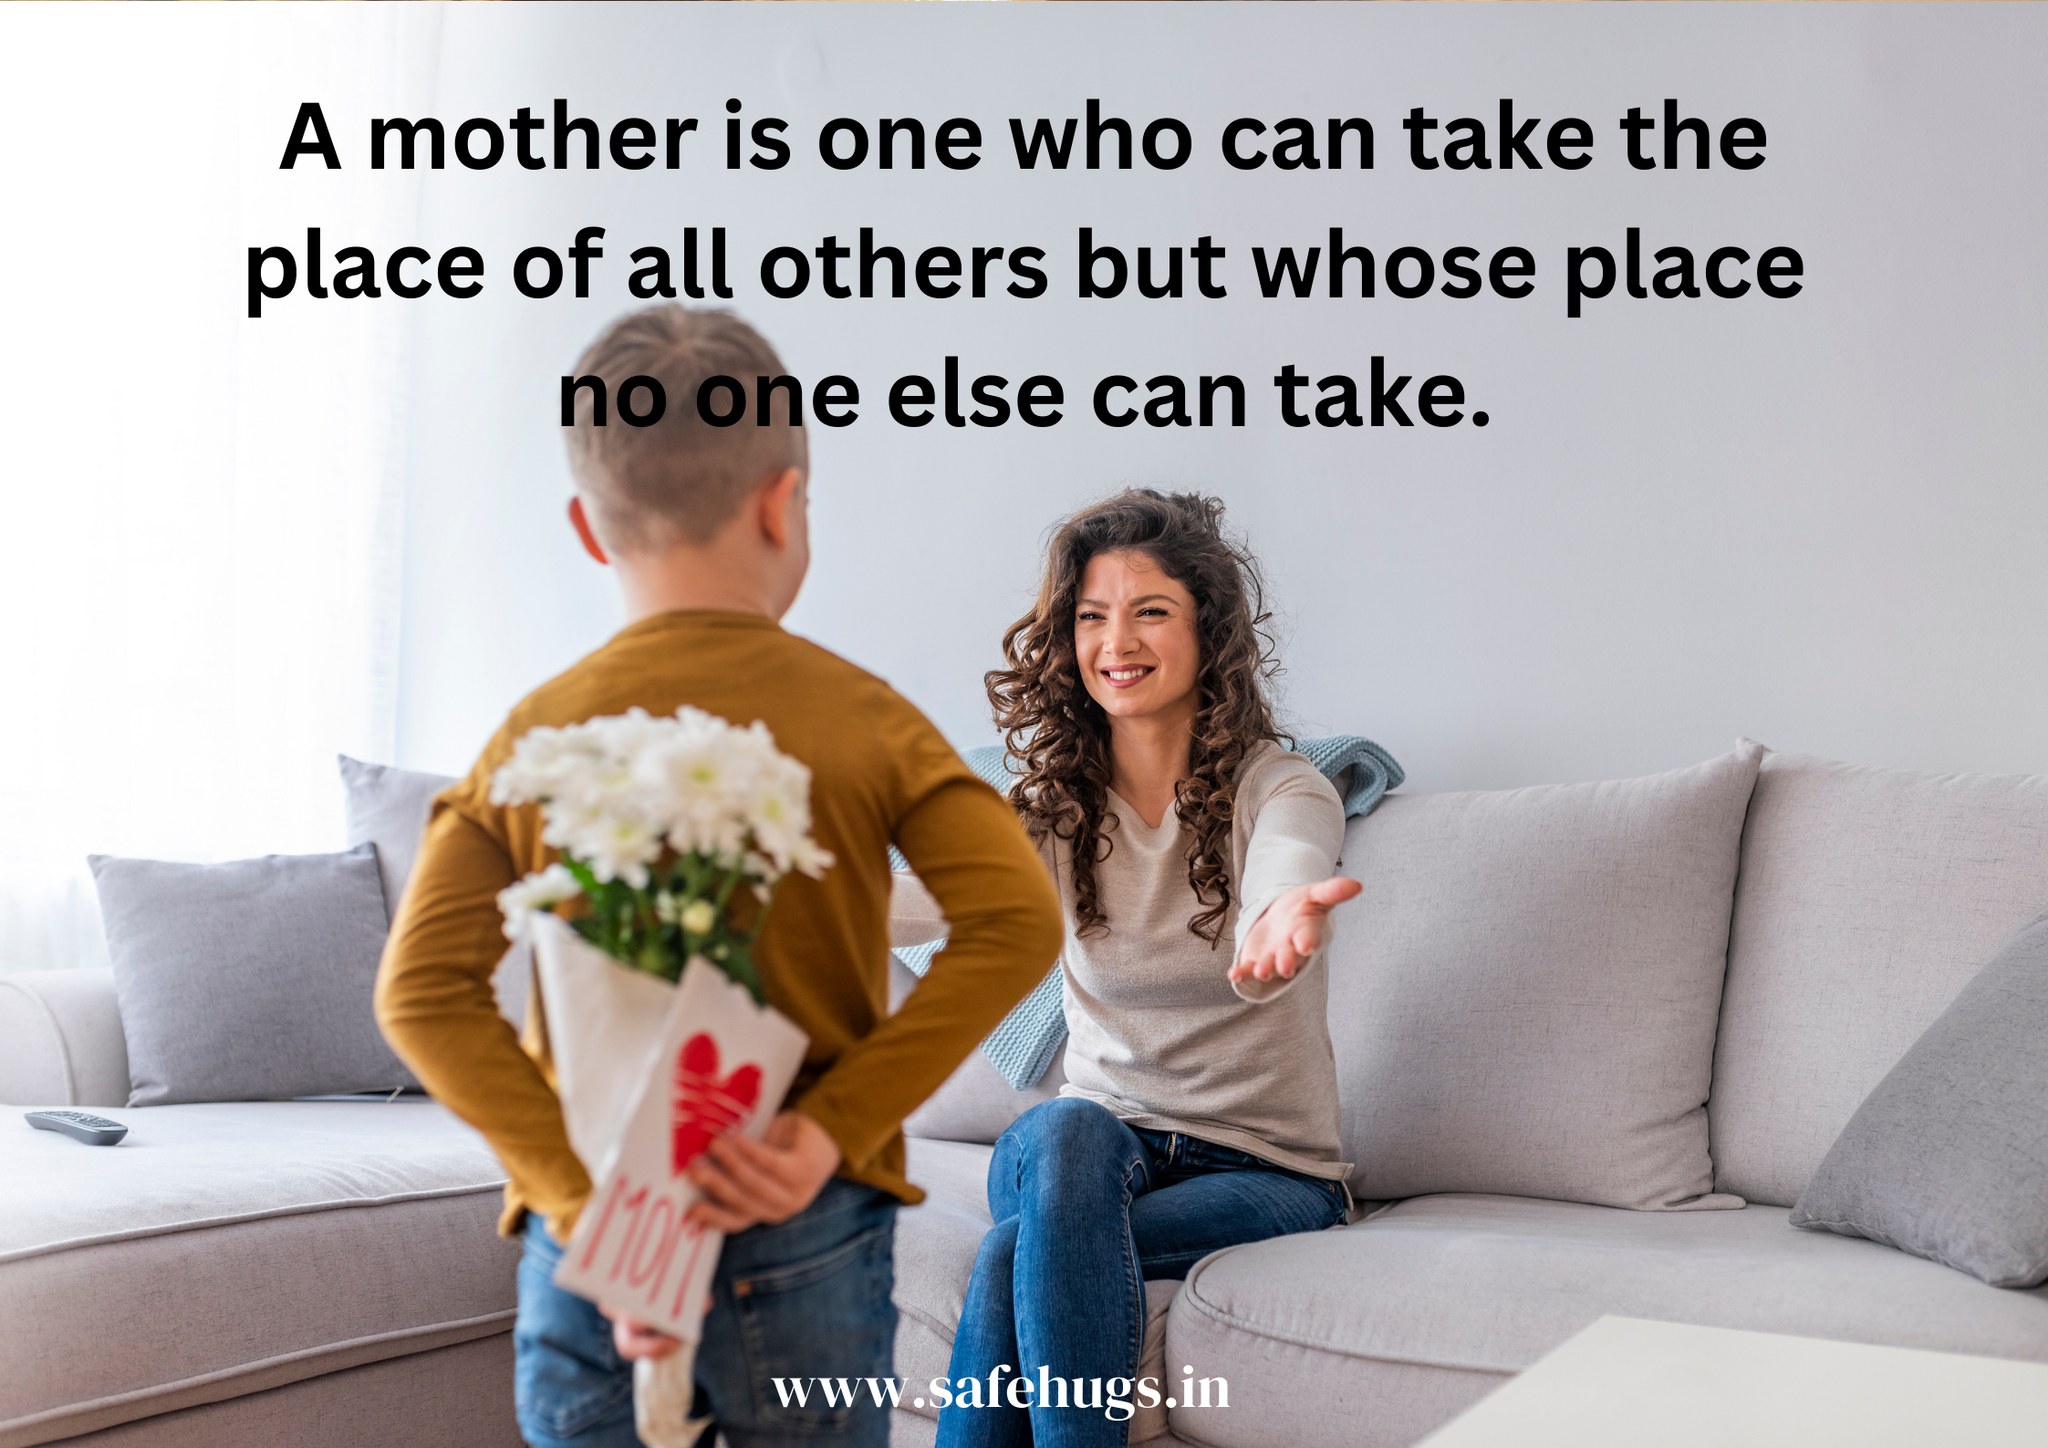 Quote: 'A mother is one who can take the place of all others but whose place no one else can take.'